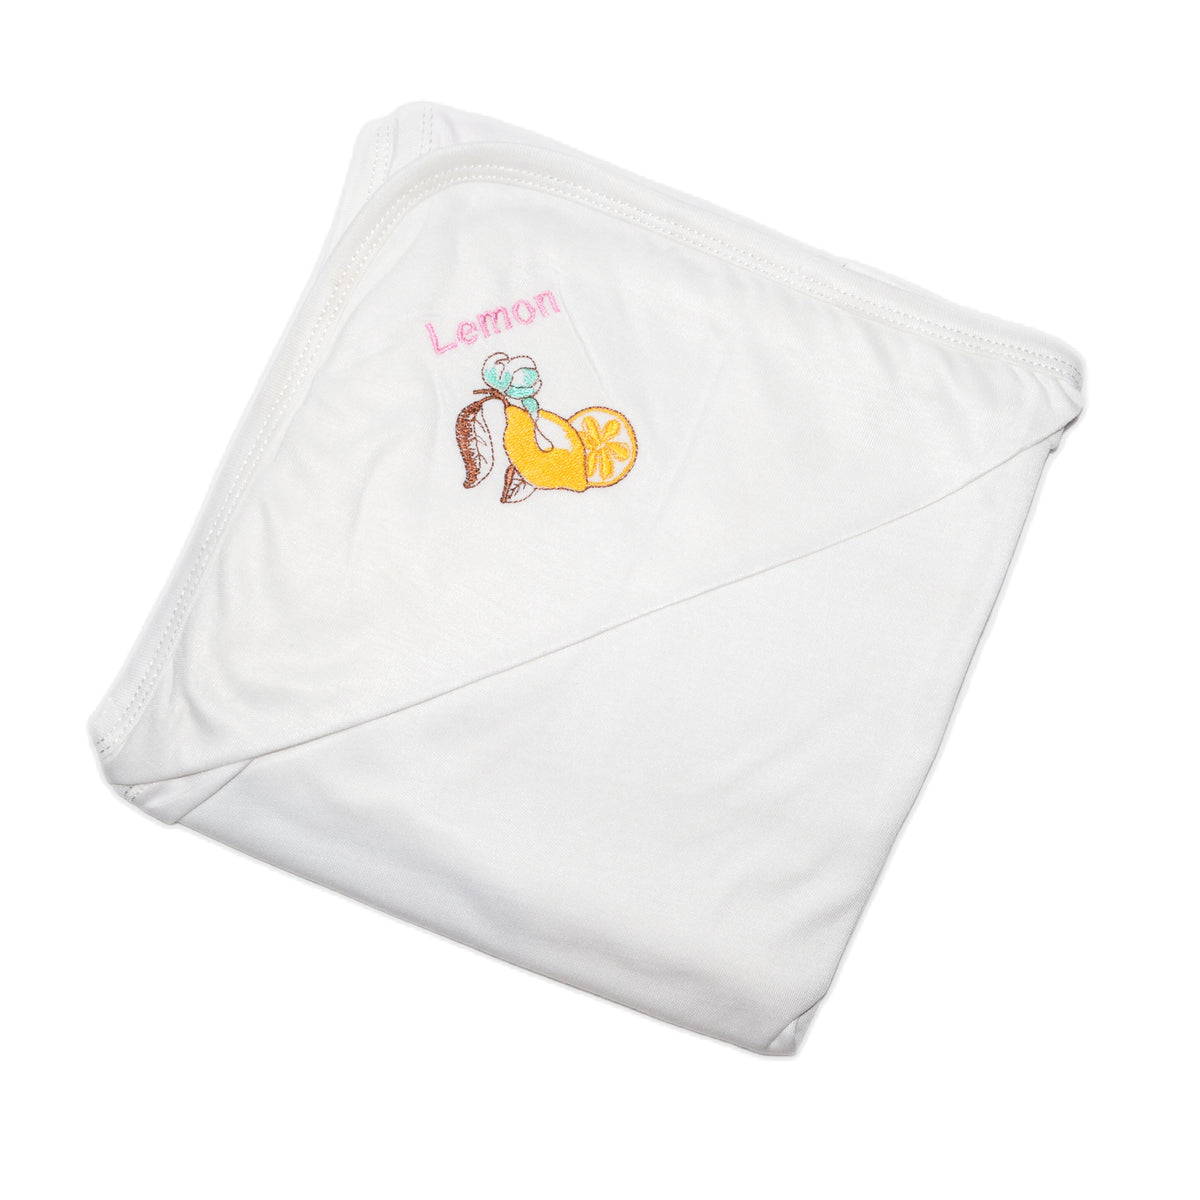 Embroided Baby Swaddle White